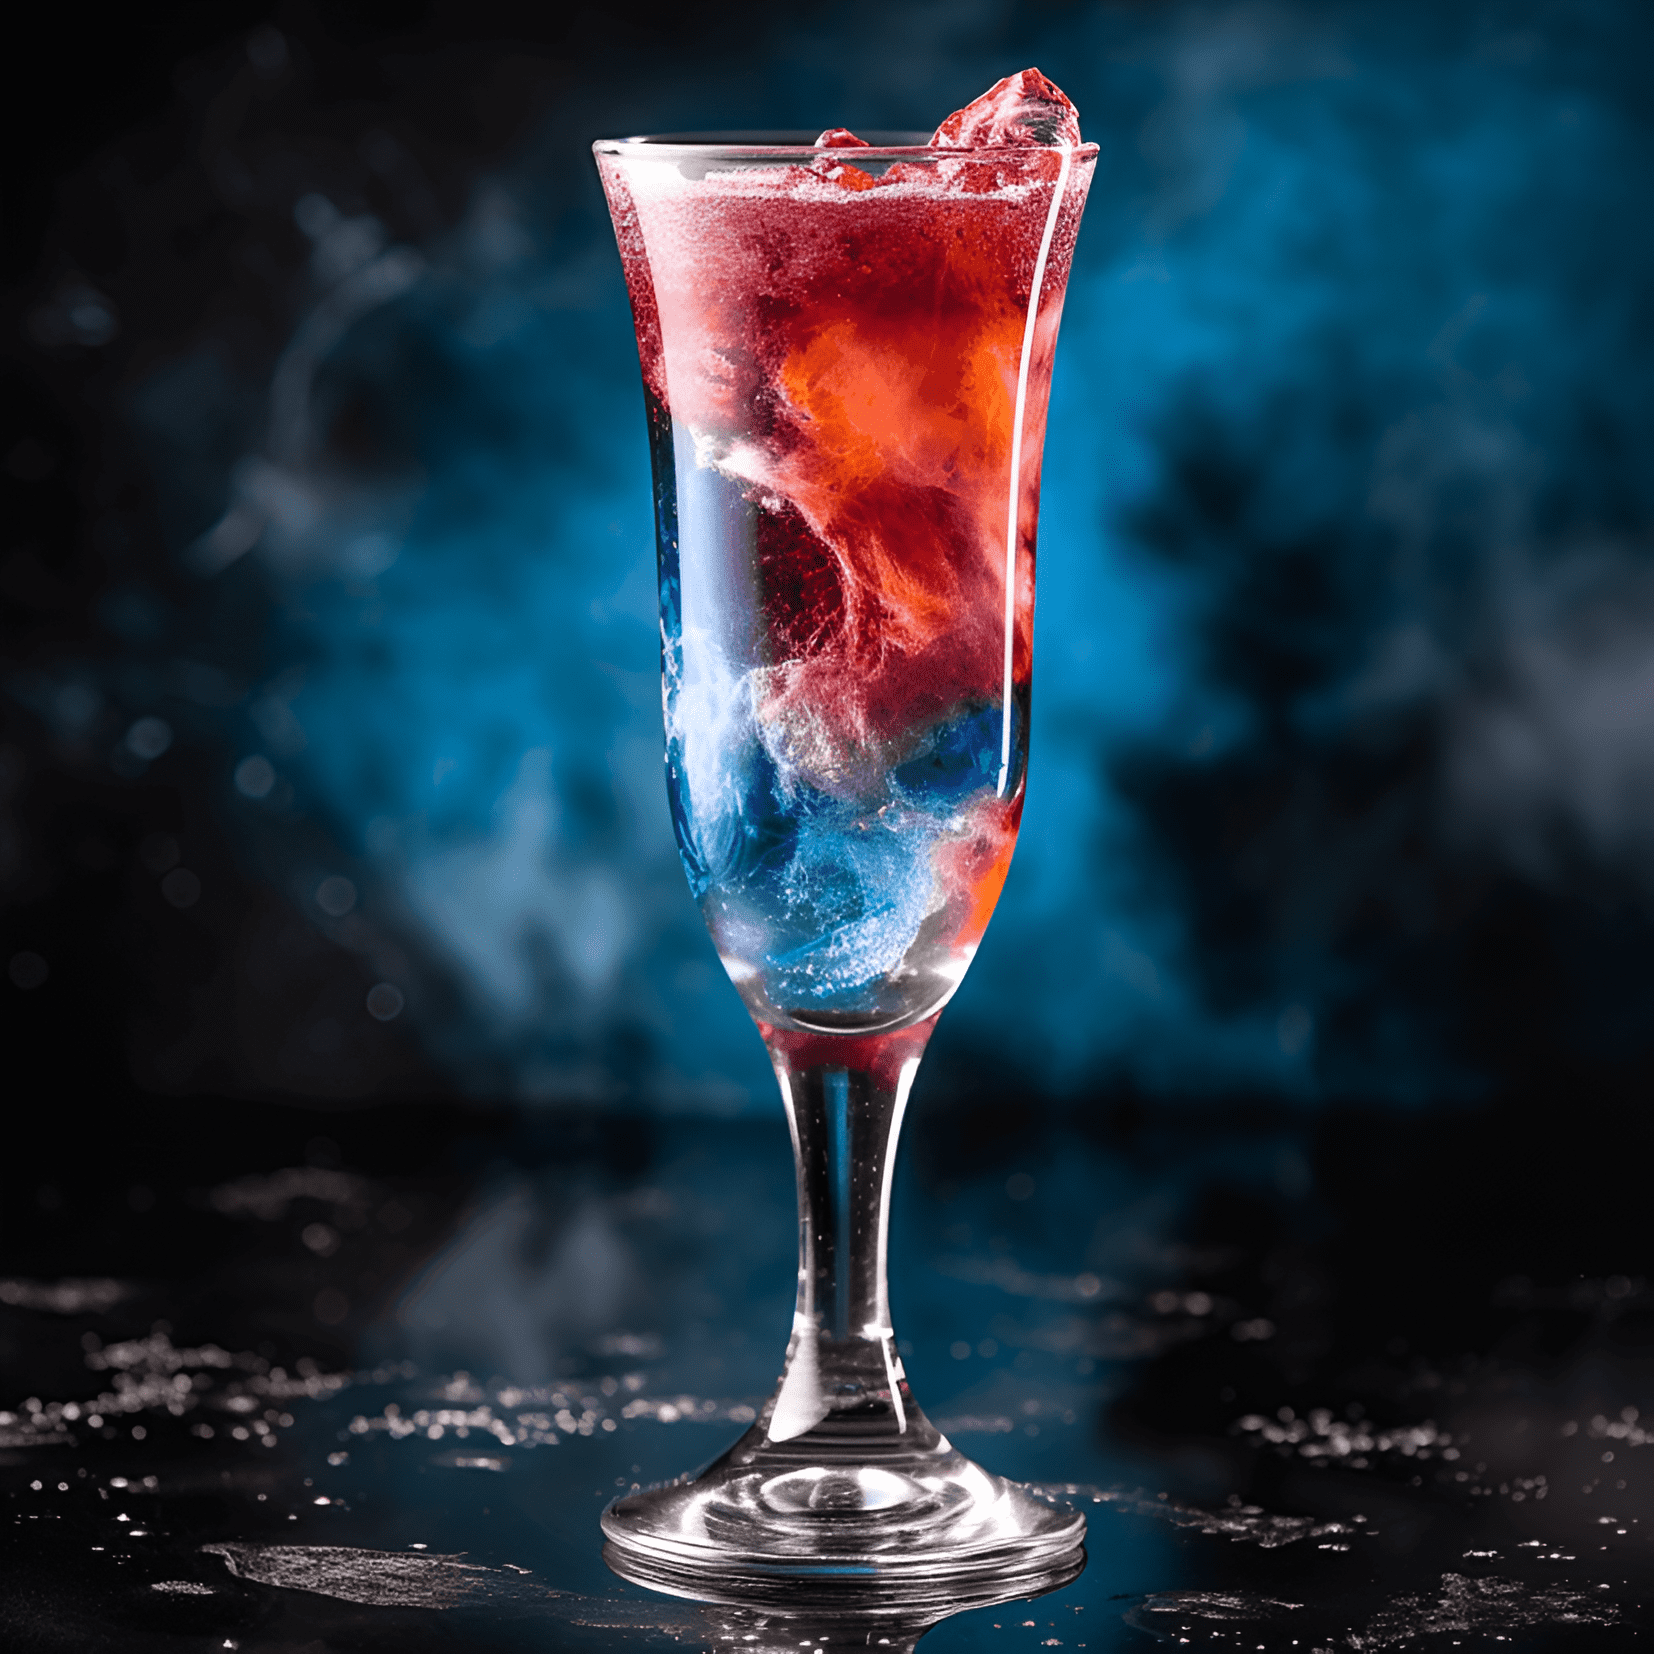 Martian Cocktail Recipe - The Martian cocktail offers a unique blend of flavors that are both sweet and sour, with a hint of bitterness. The drink is light and refreshing, with a subtle effervescence that tickles the palate. The combination of fruity and herbal notes creates a complex and intriguing taste experience.